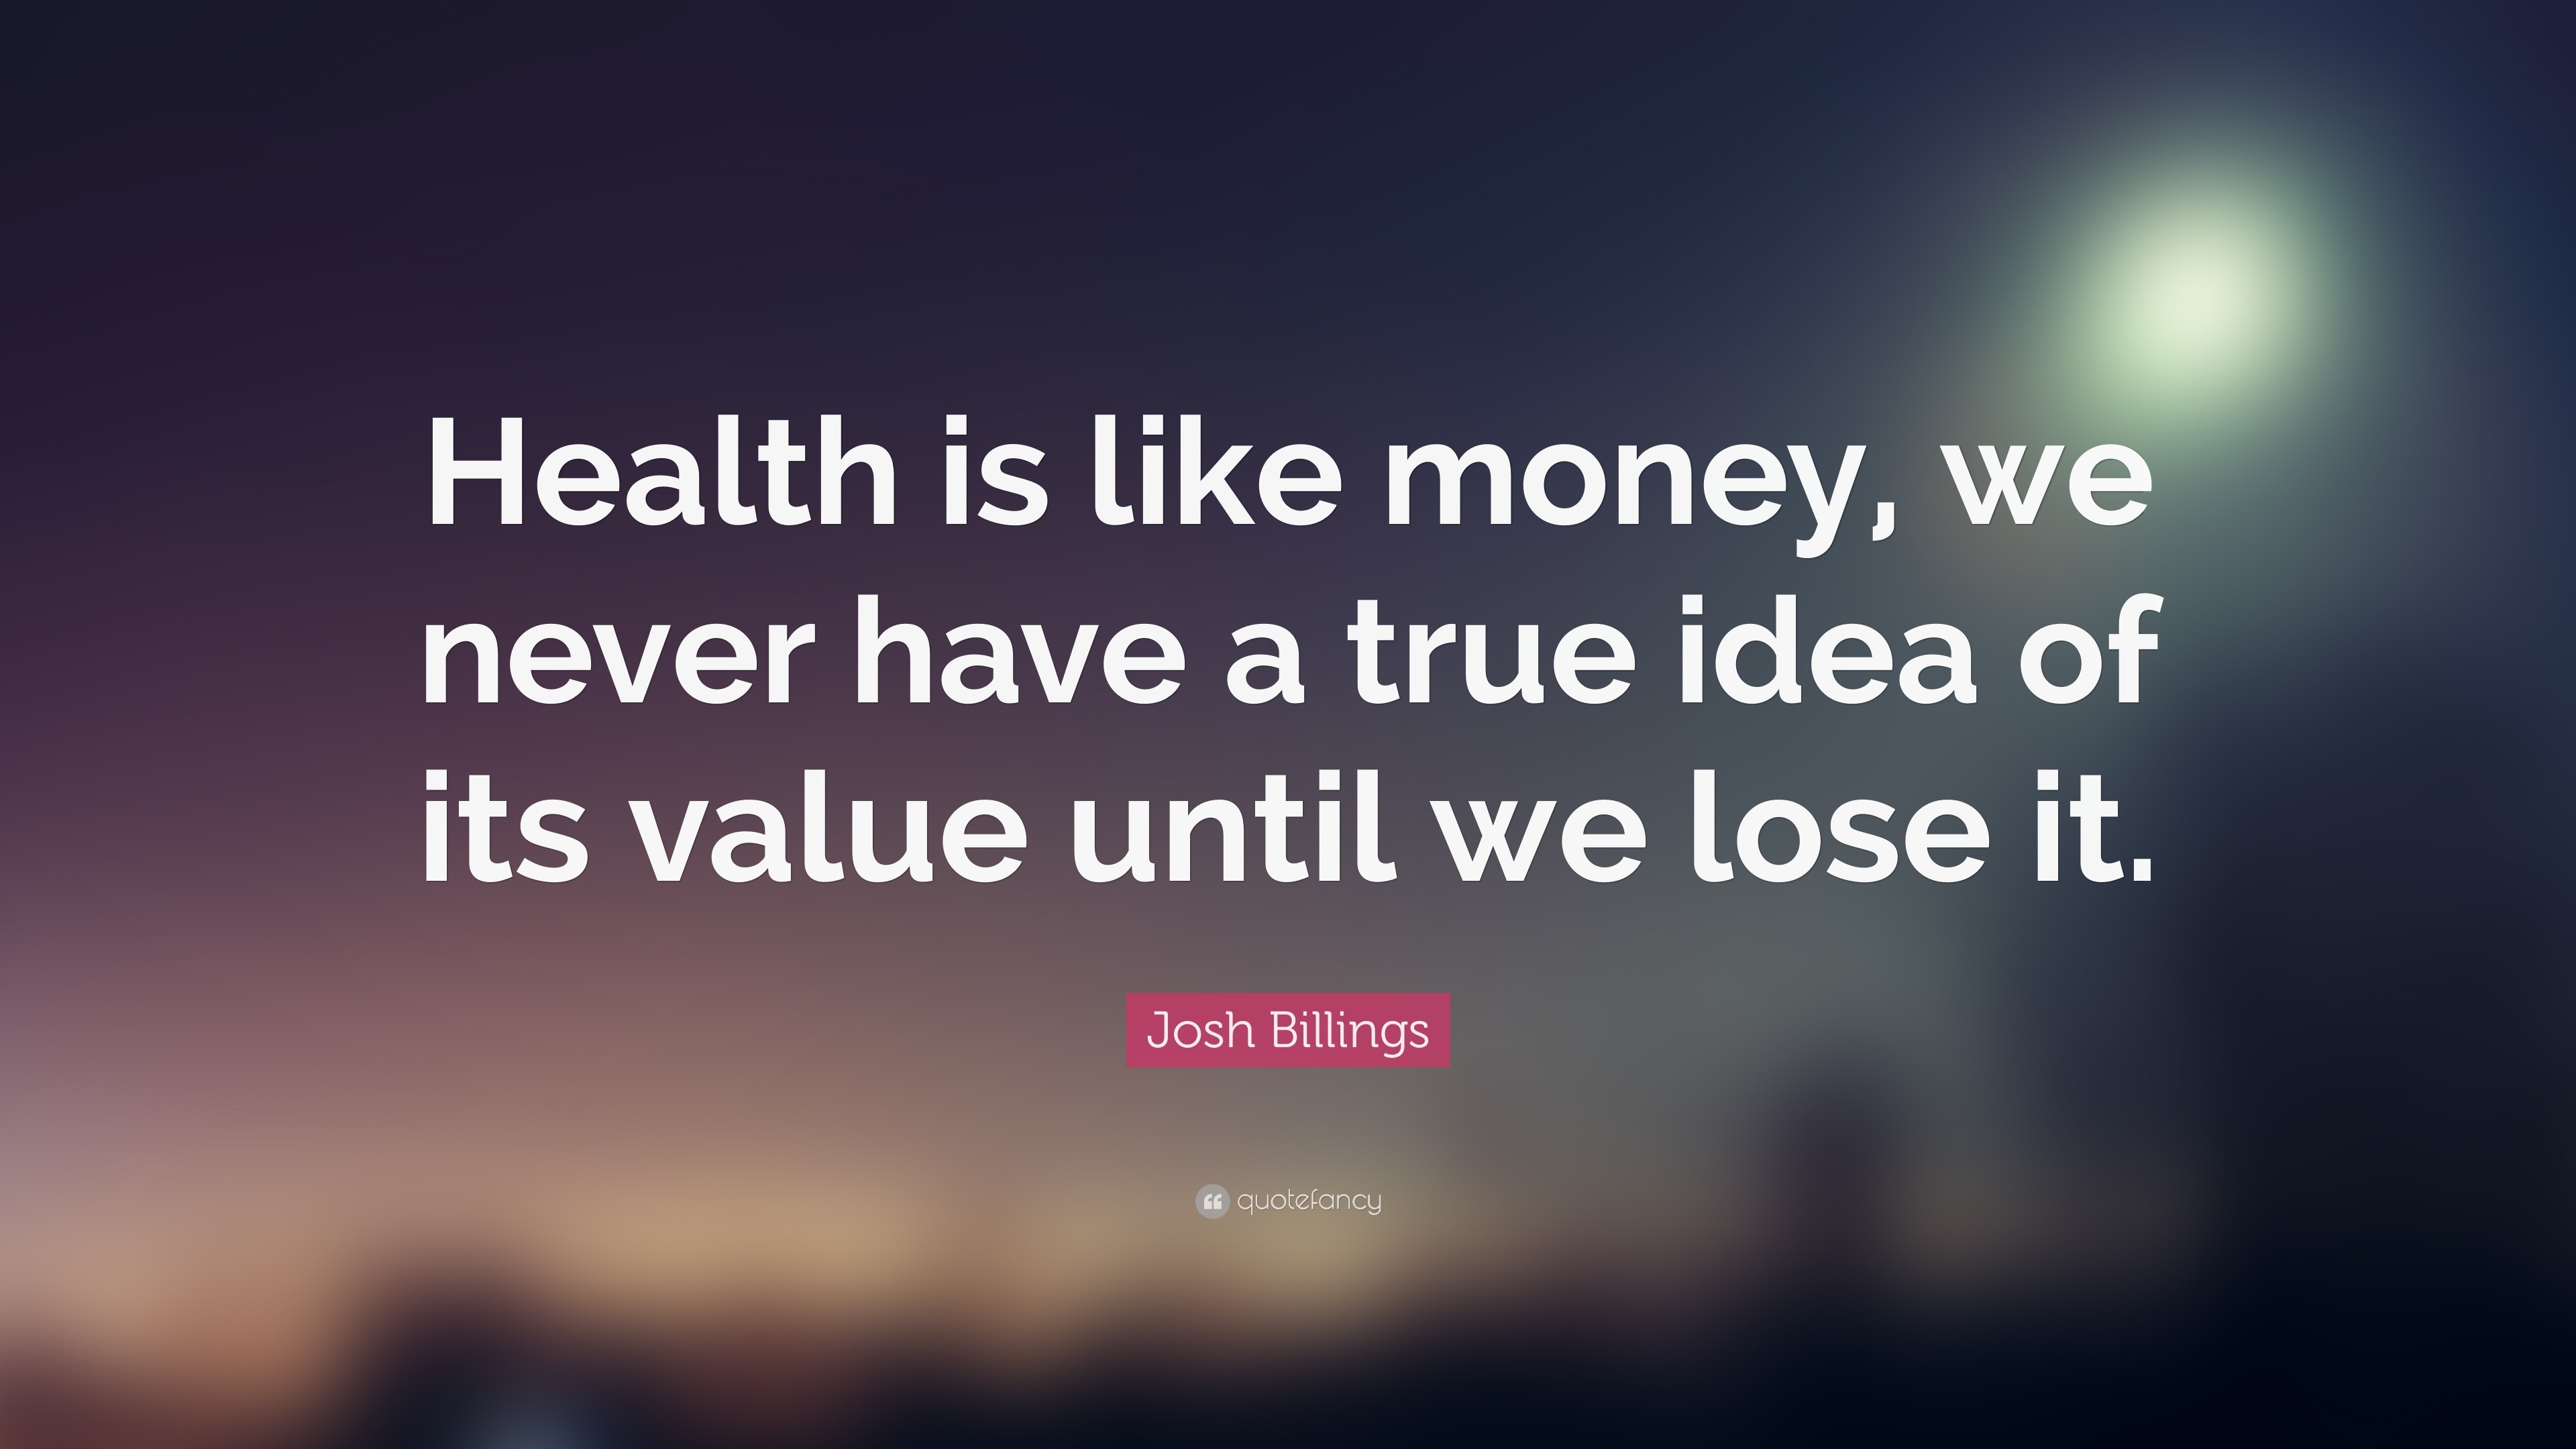 Josh Billings Quote: “Health is like money, we never have a true idea